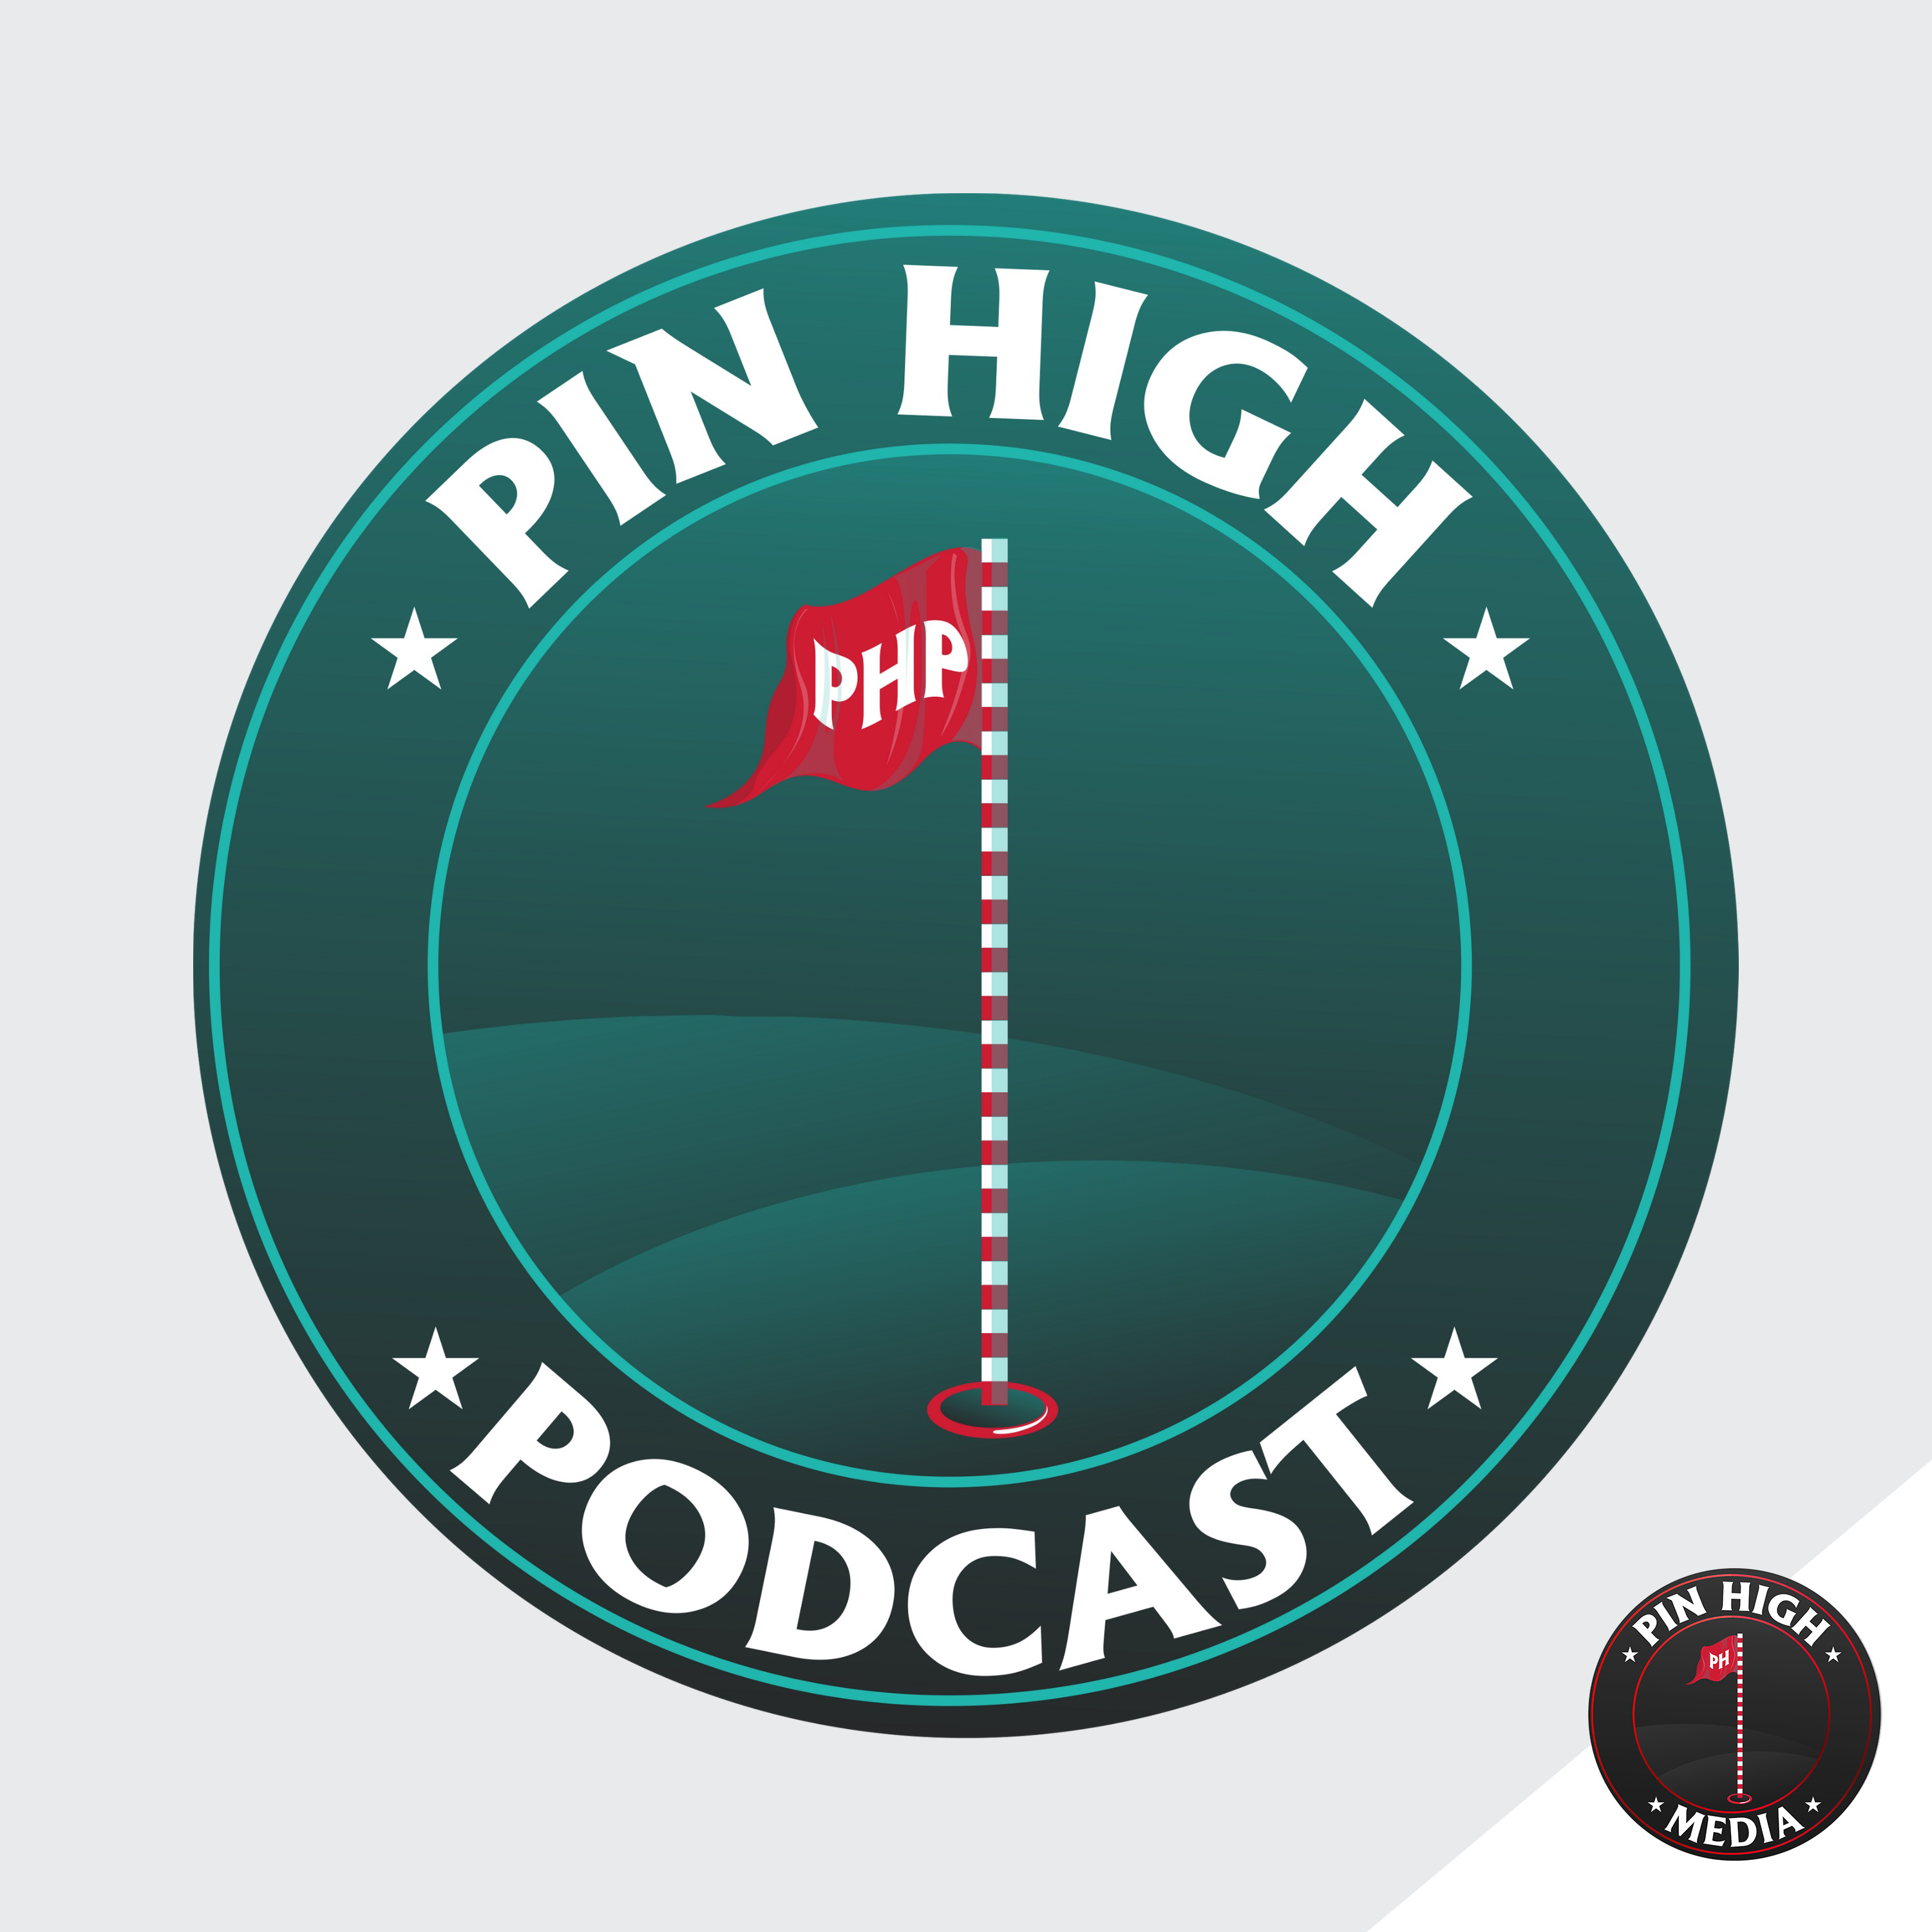 Pin High Podcast Ep. 167: Grant Horvat, Micah Morris & GM Golf to LIV Golf?